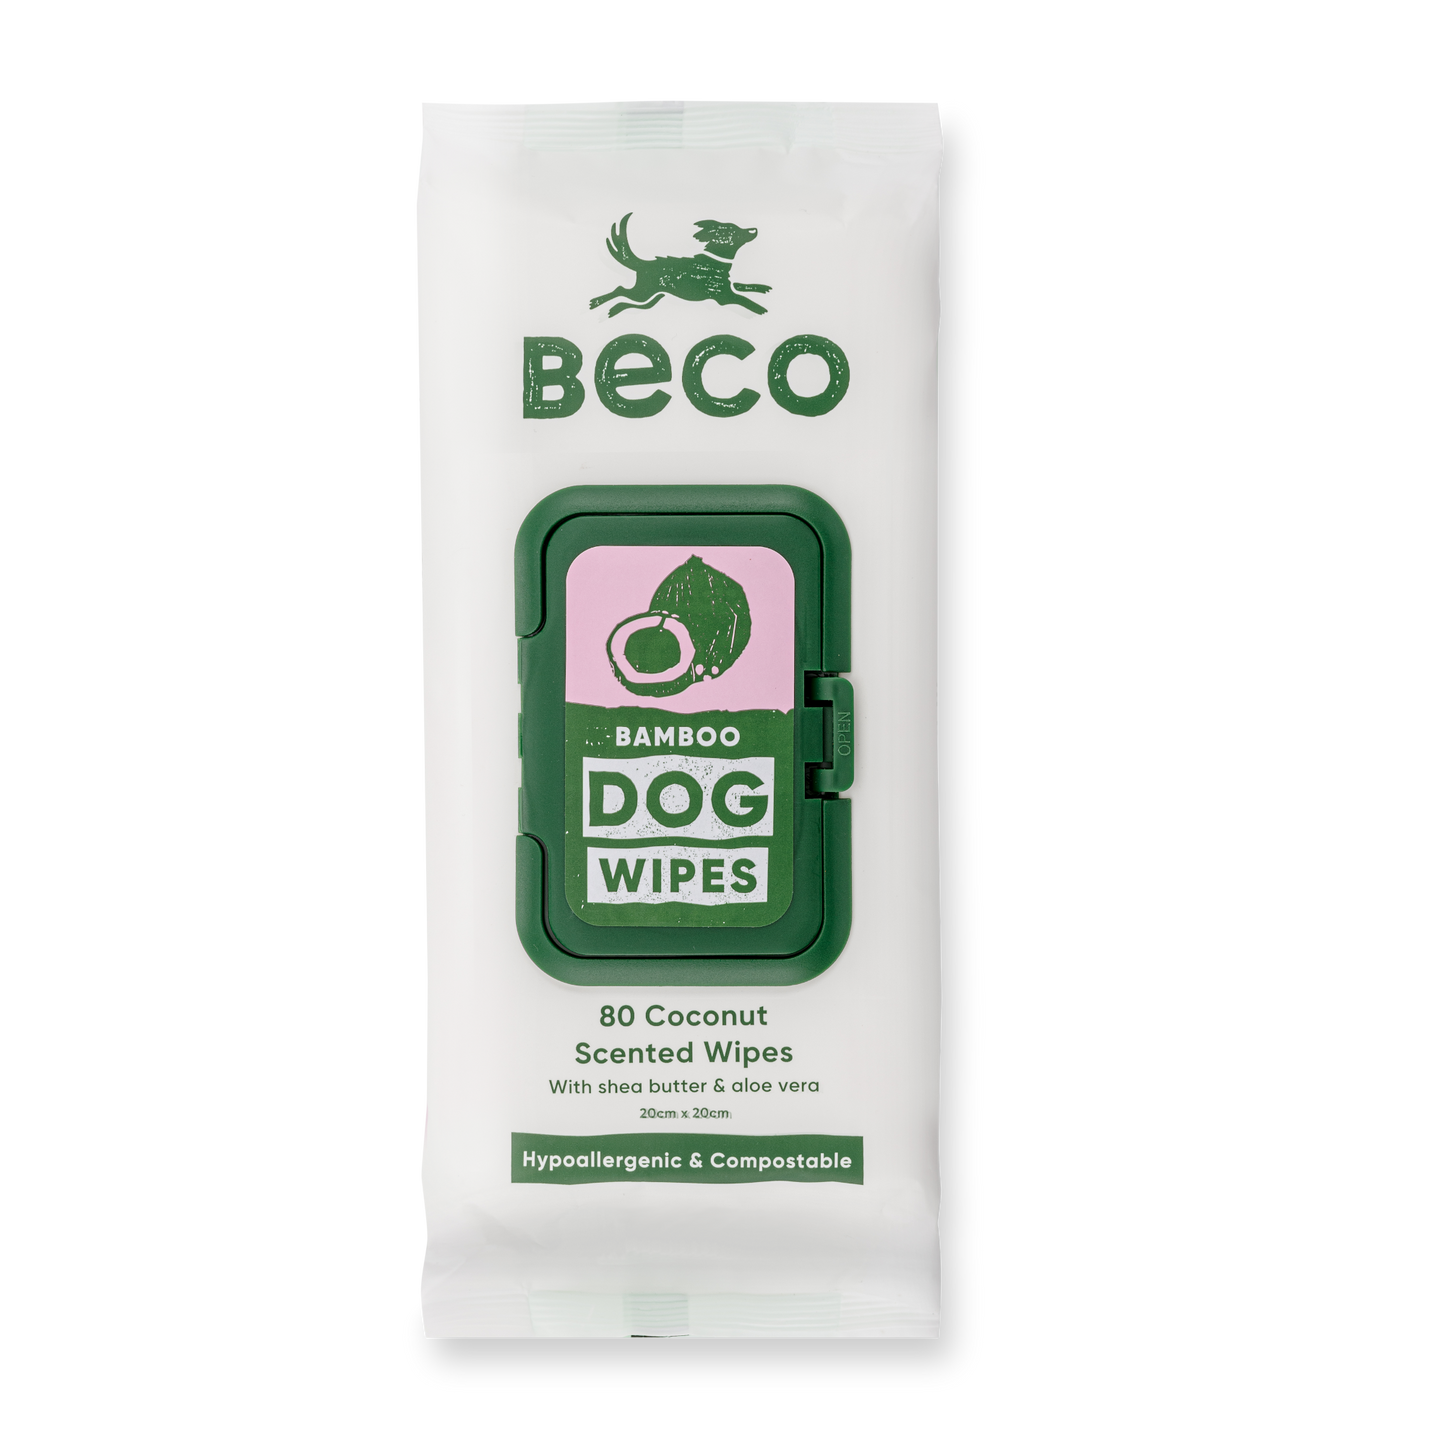 Beco Bamboo Dog Wipes, Coconut Scented